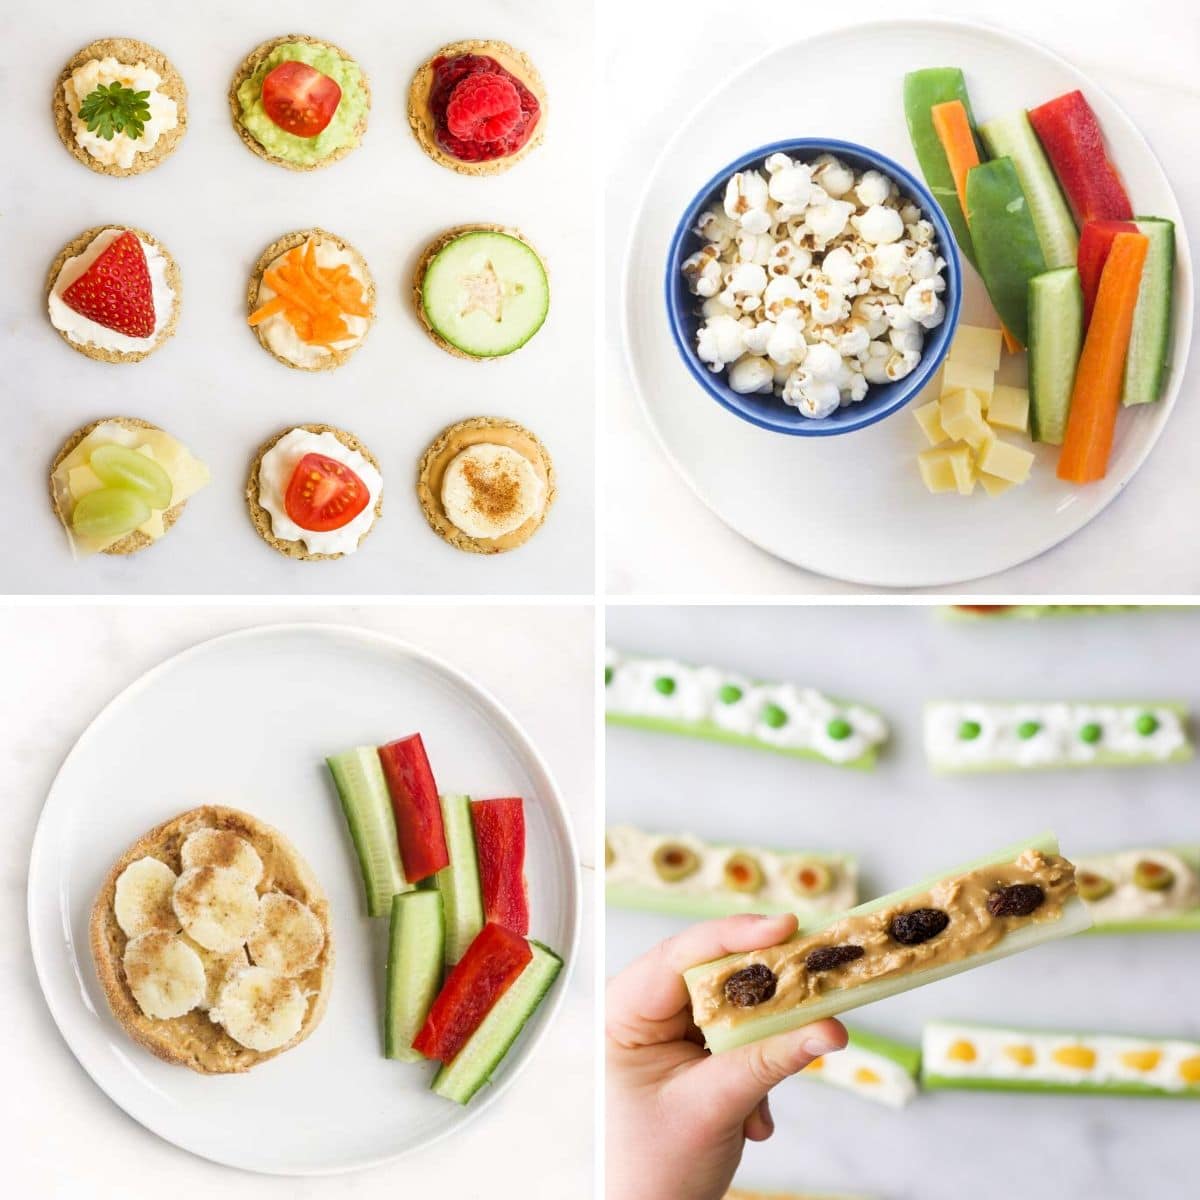 Snack Ideas for Kids